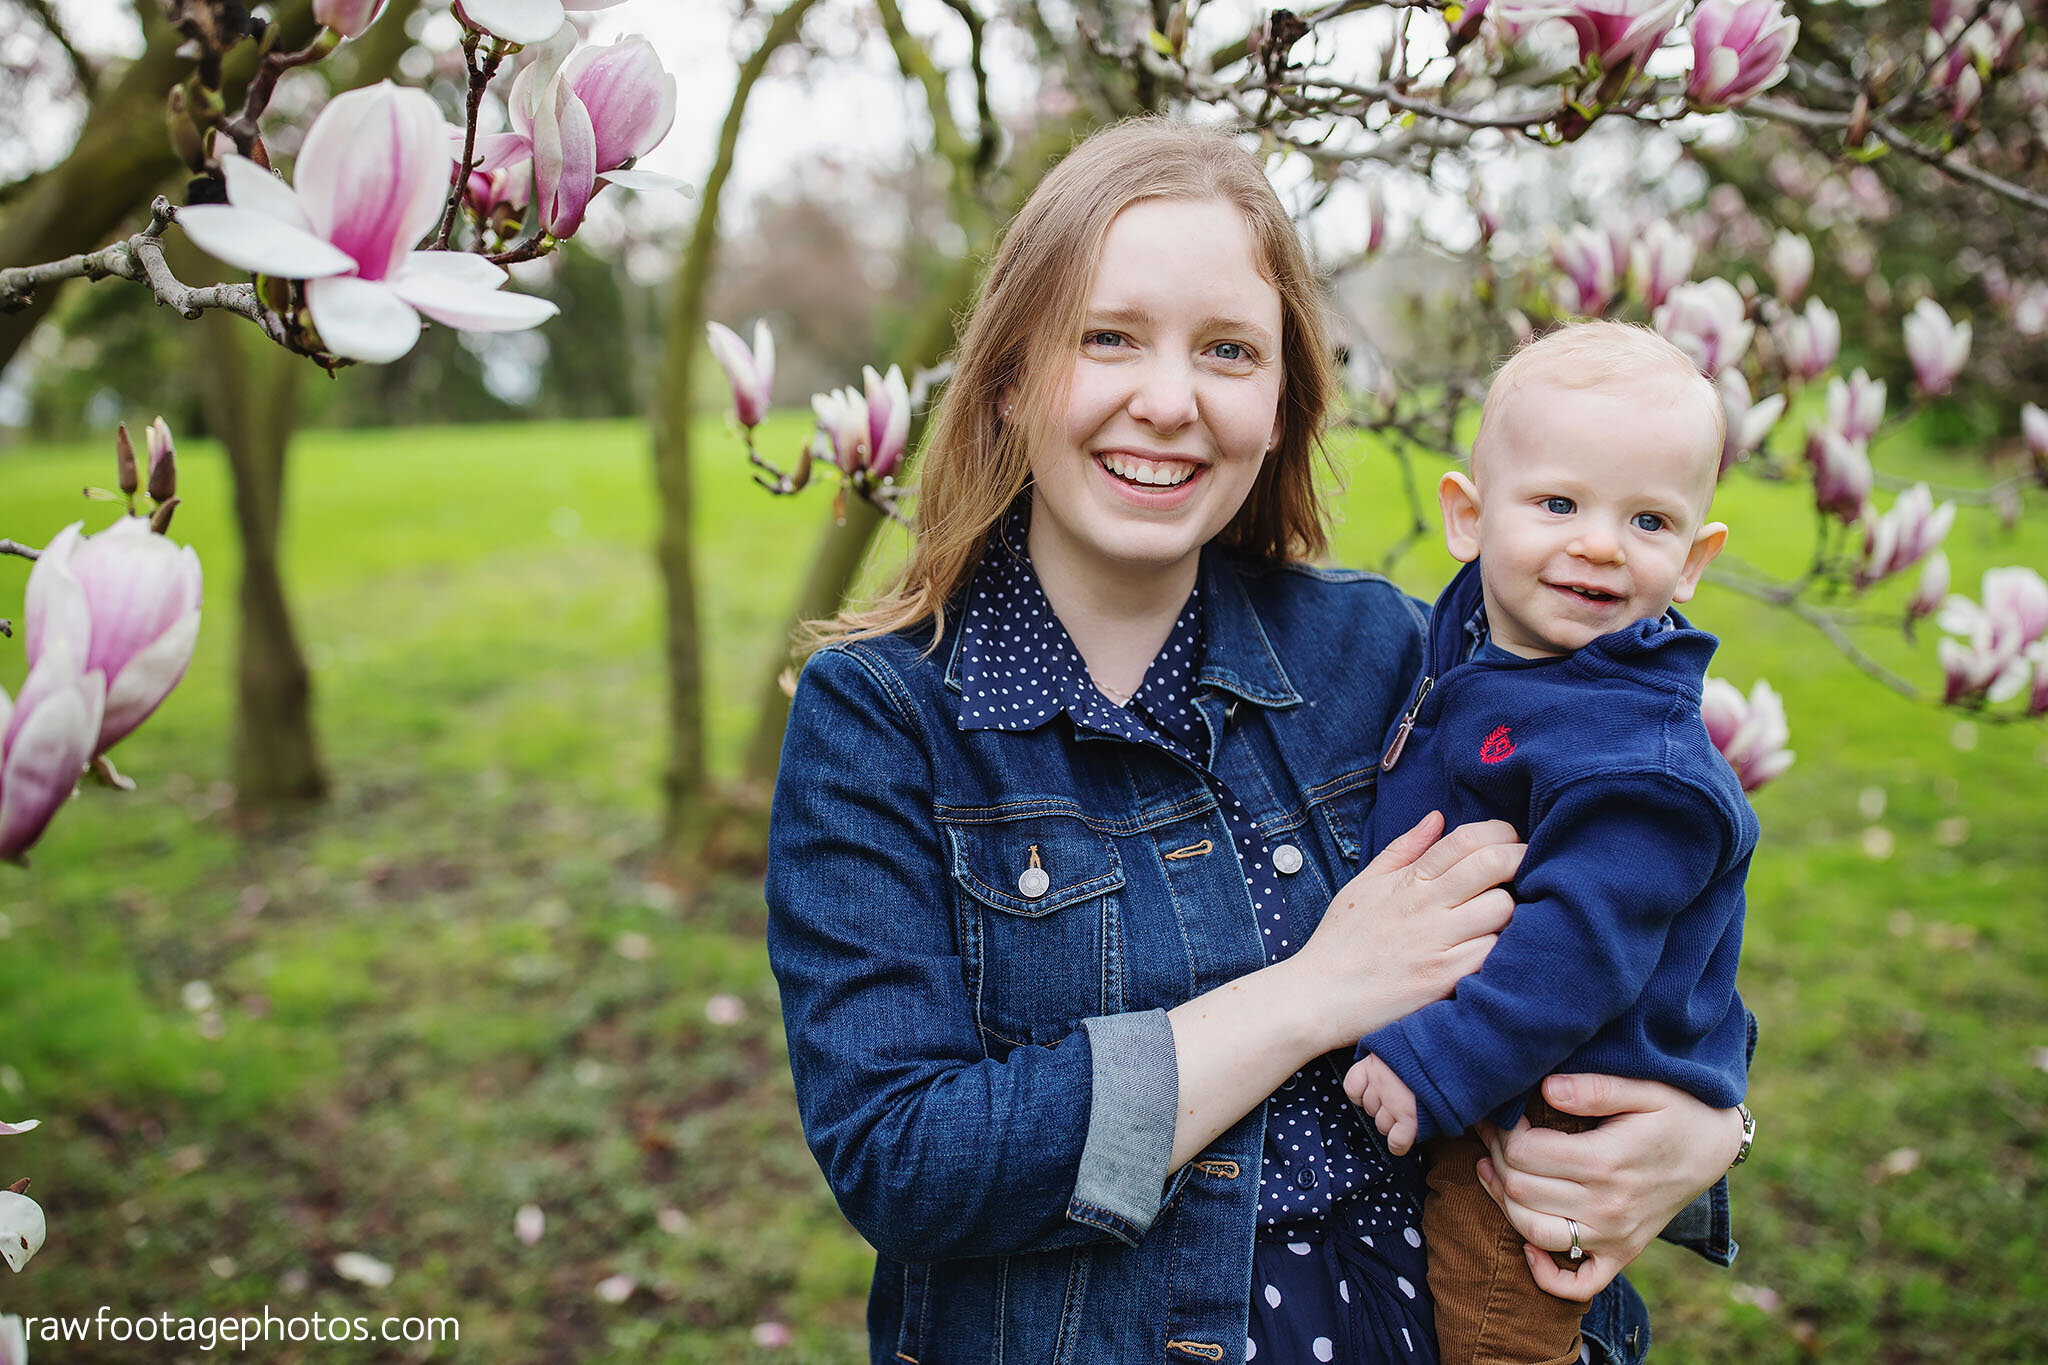 london_ontario_family_photographer-raw_footage_photography-spring_blossoms-extended_family_session-magnolia-blossoms_019.jpg